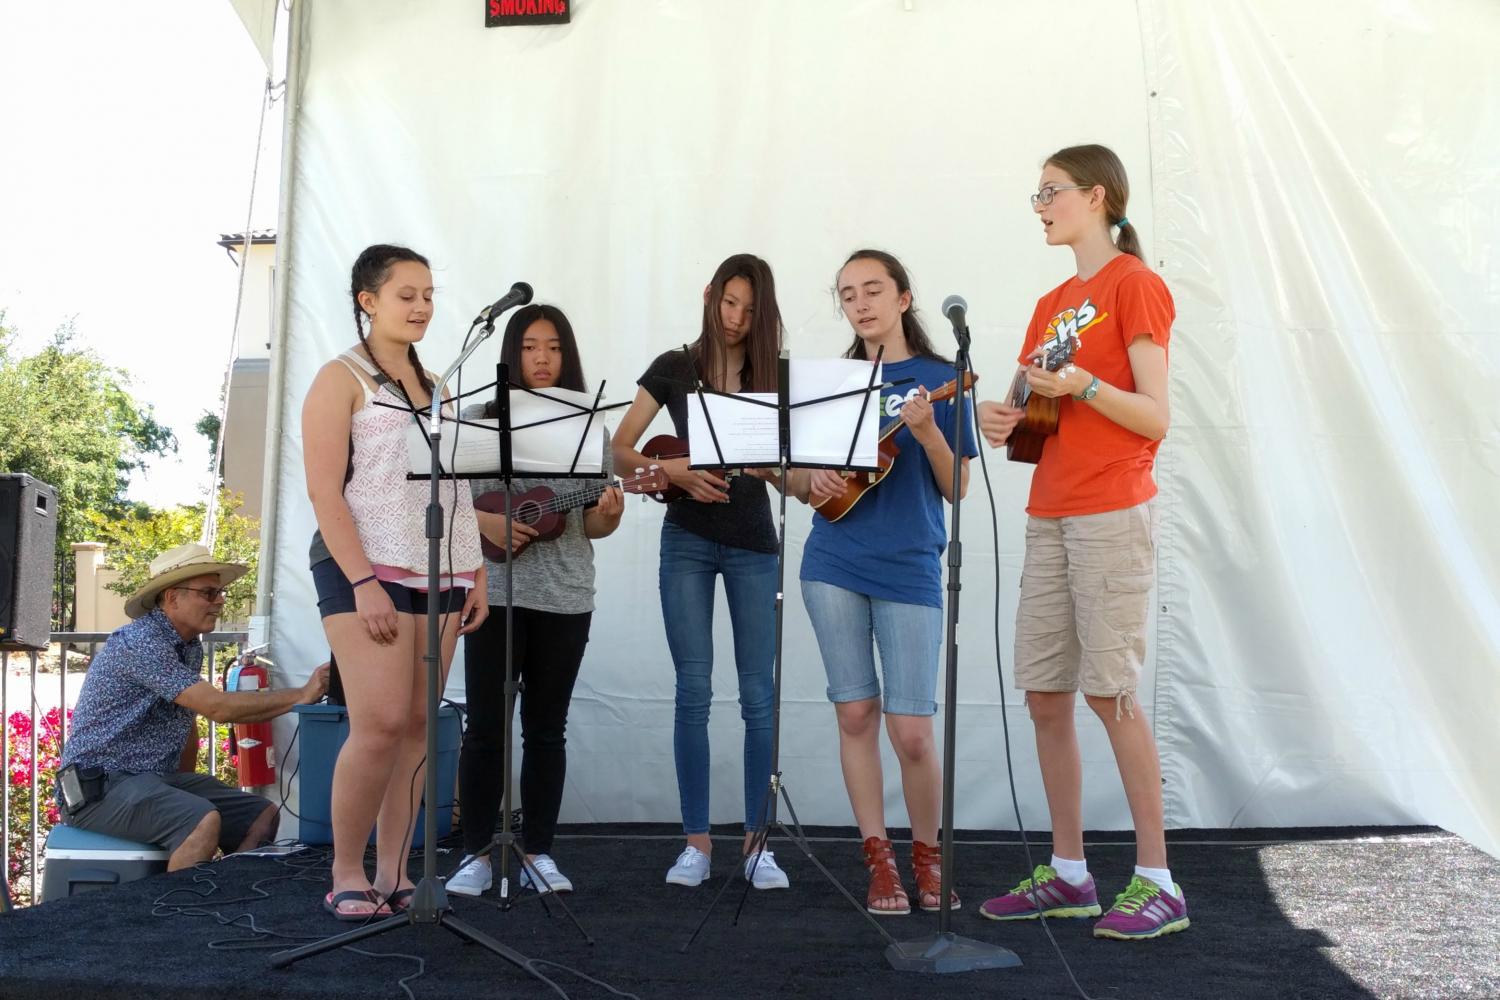 Ukelele Club Performs At Art In The Park